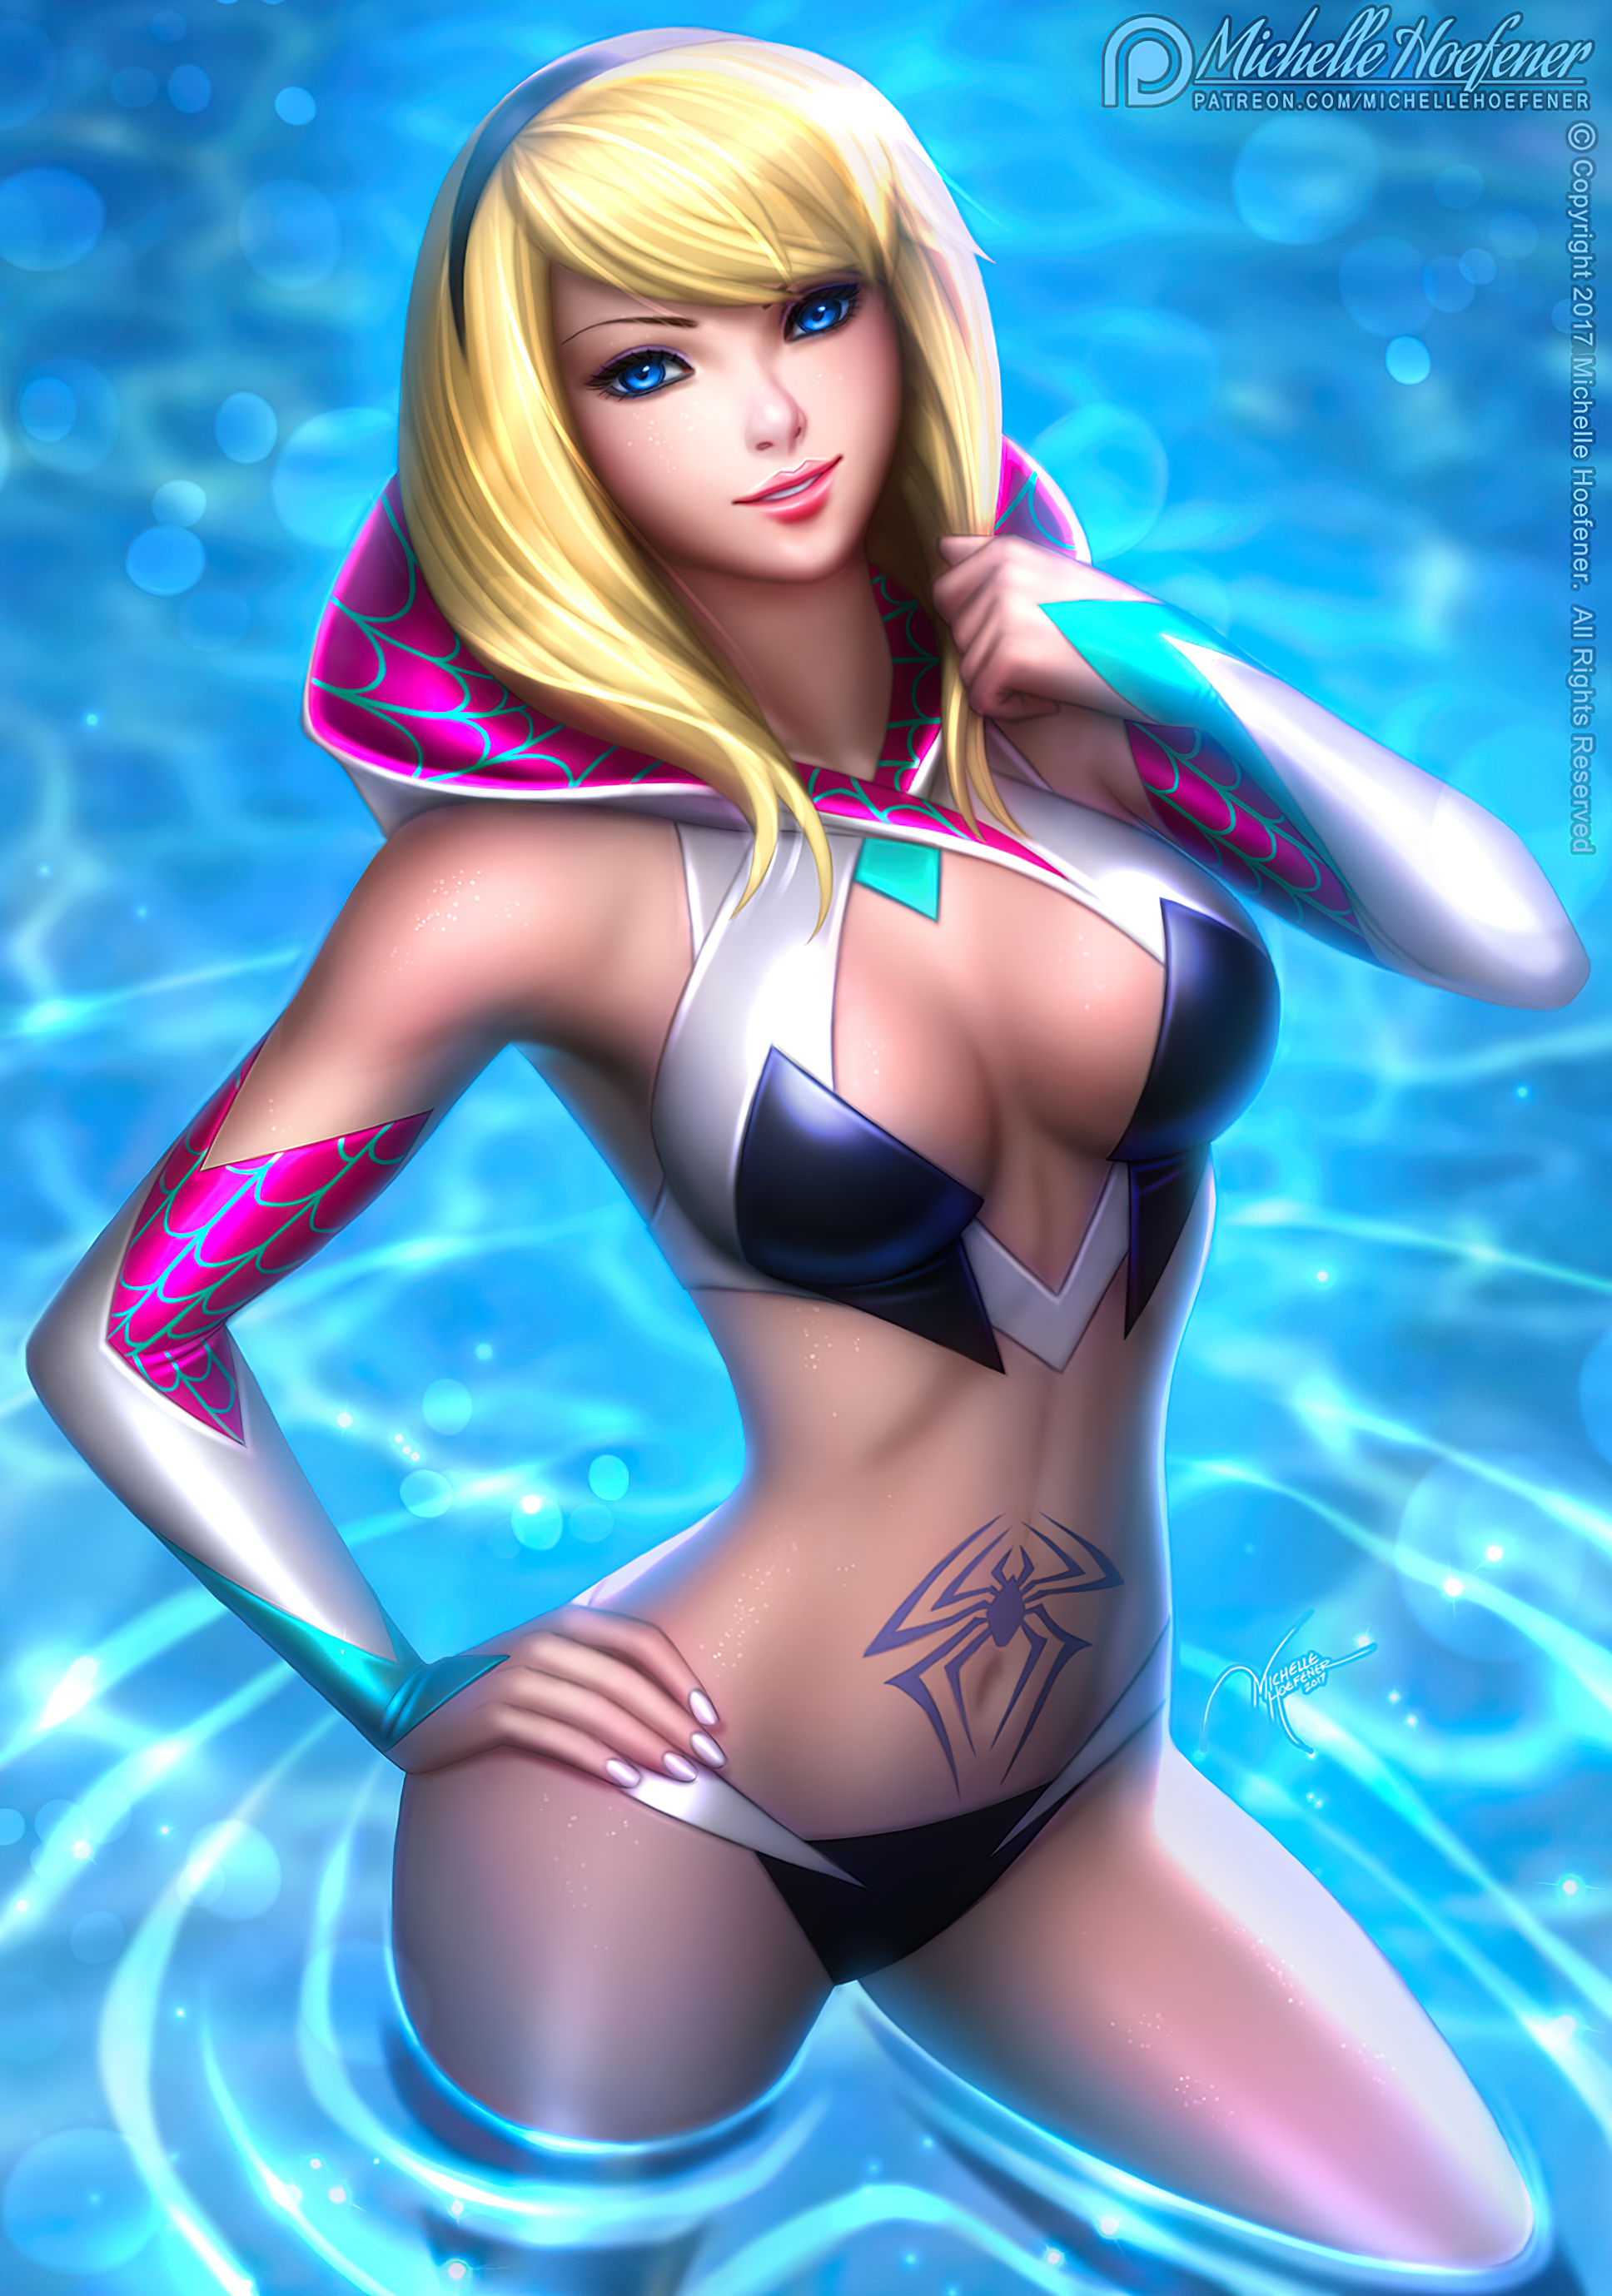 ANIME-PICTURES.NET-622553-968x1379-marvel+comics-gwen+stacy-spider-gwen-mic...